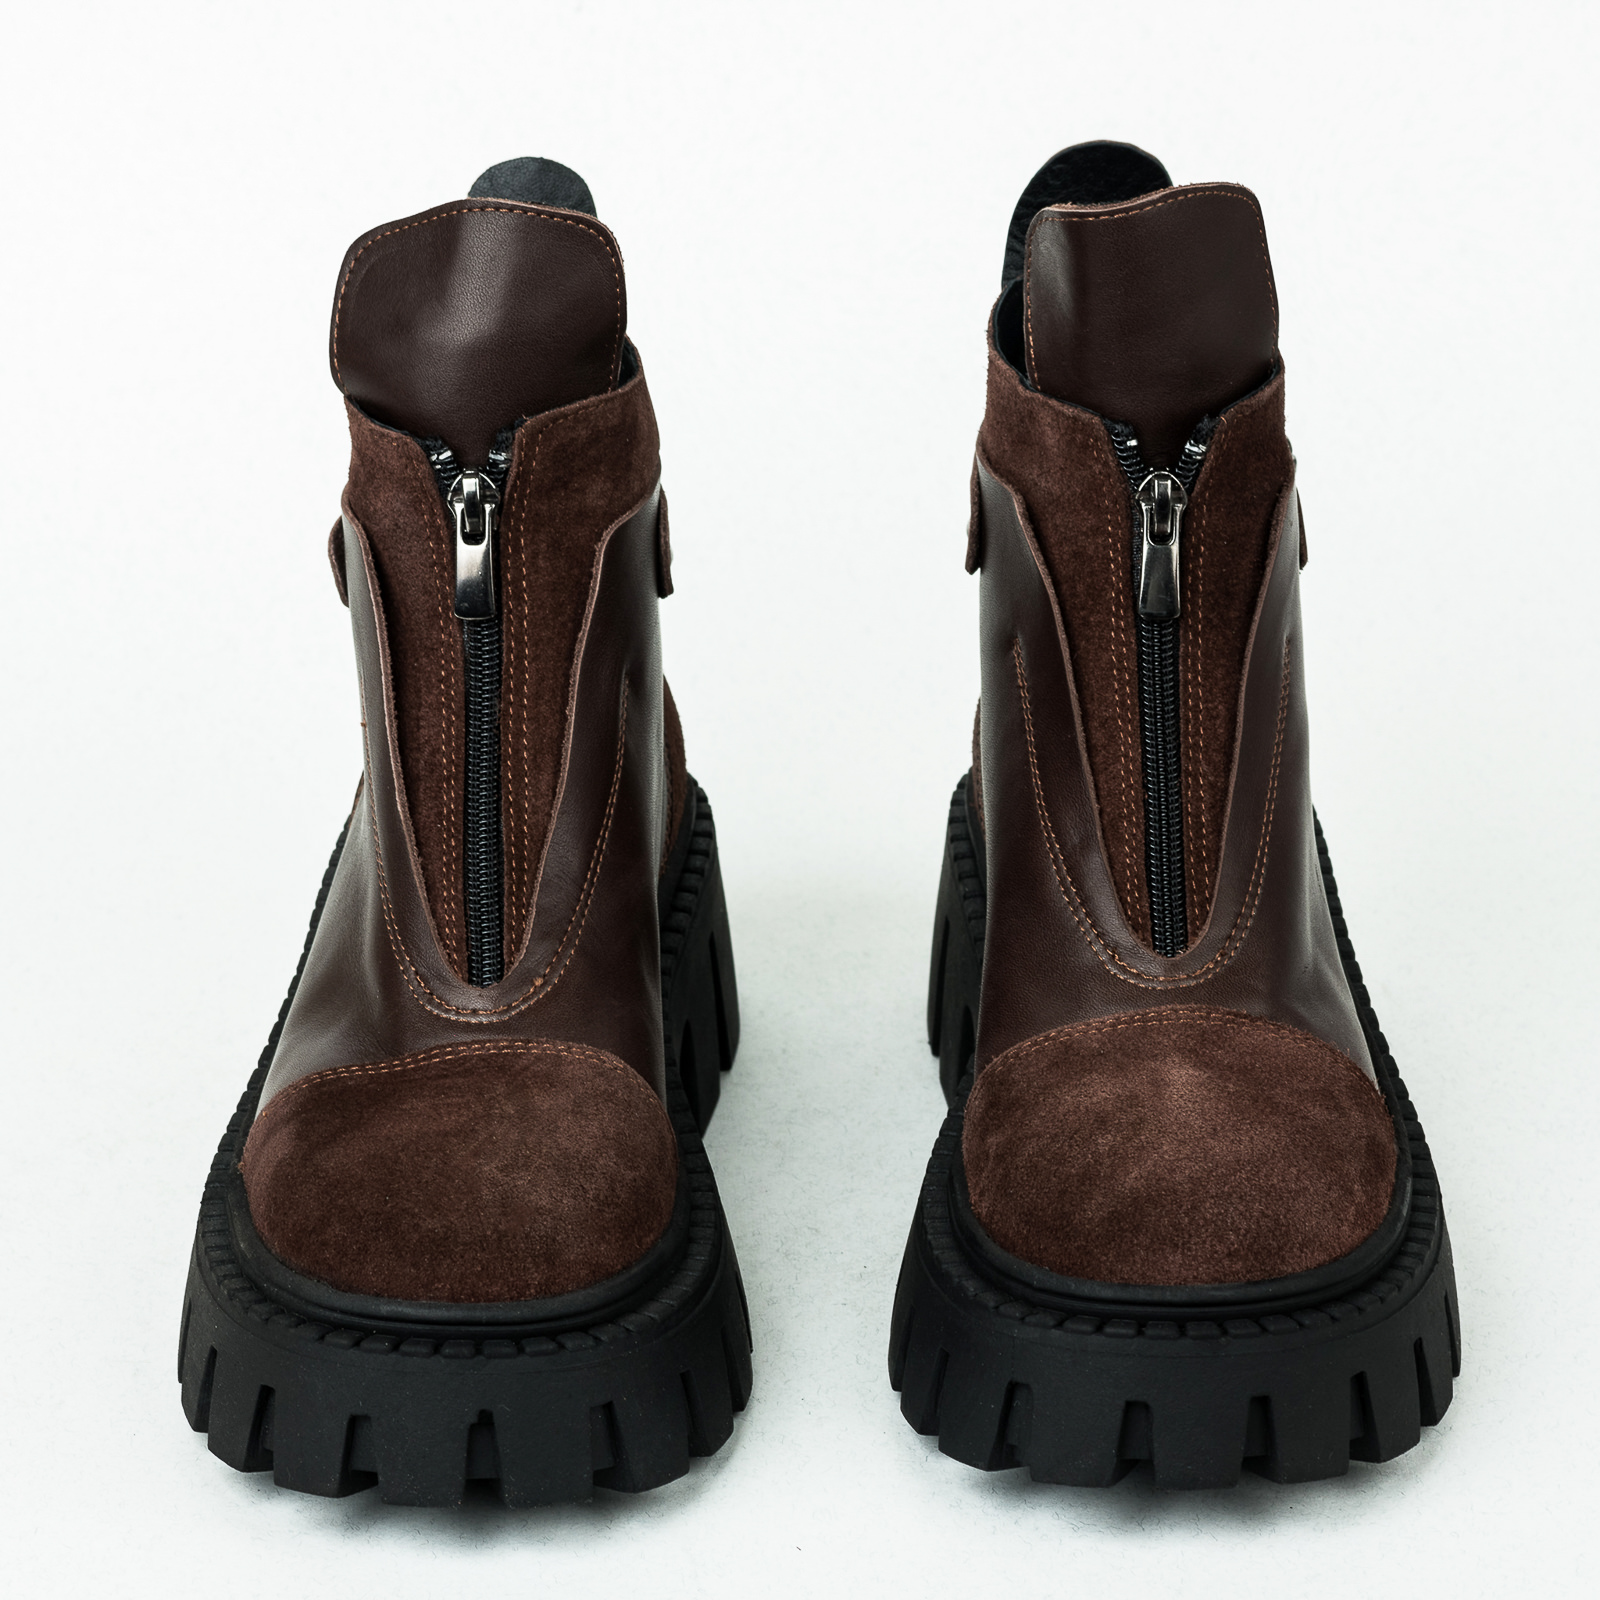 Leather booties B246 - BROWN